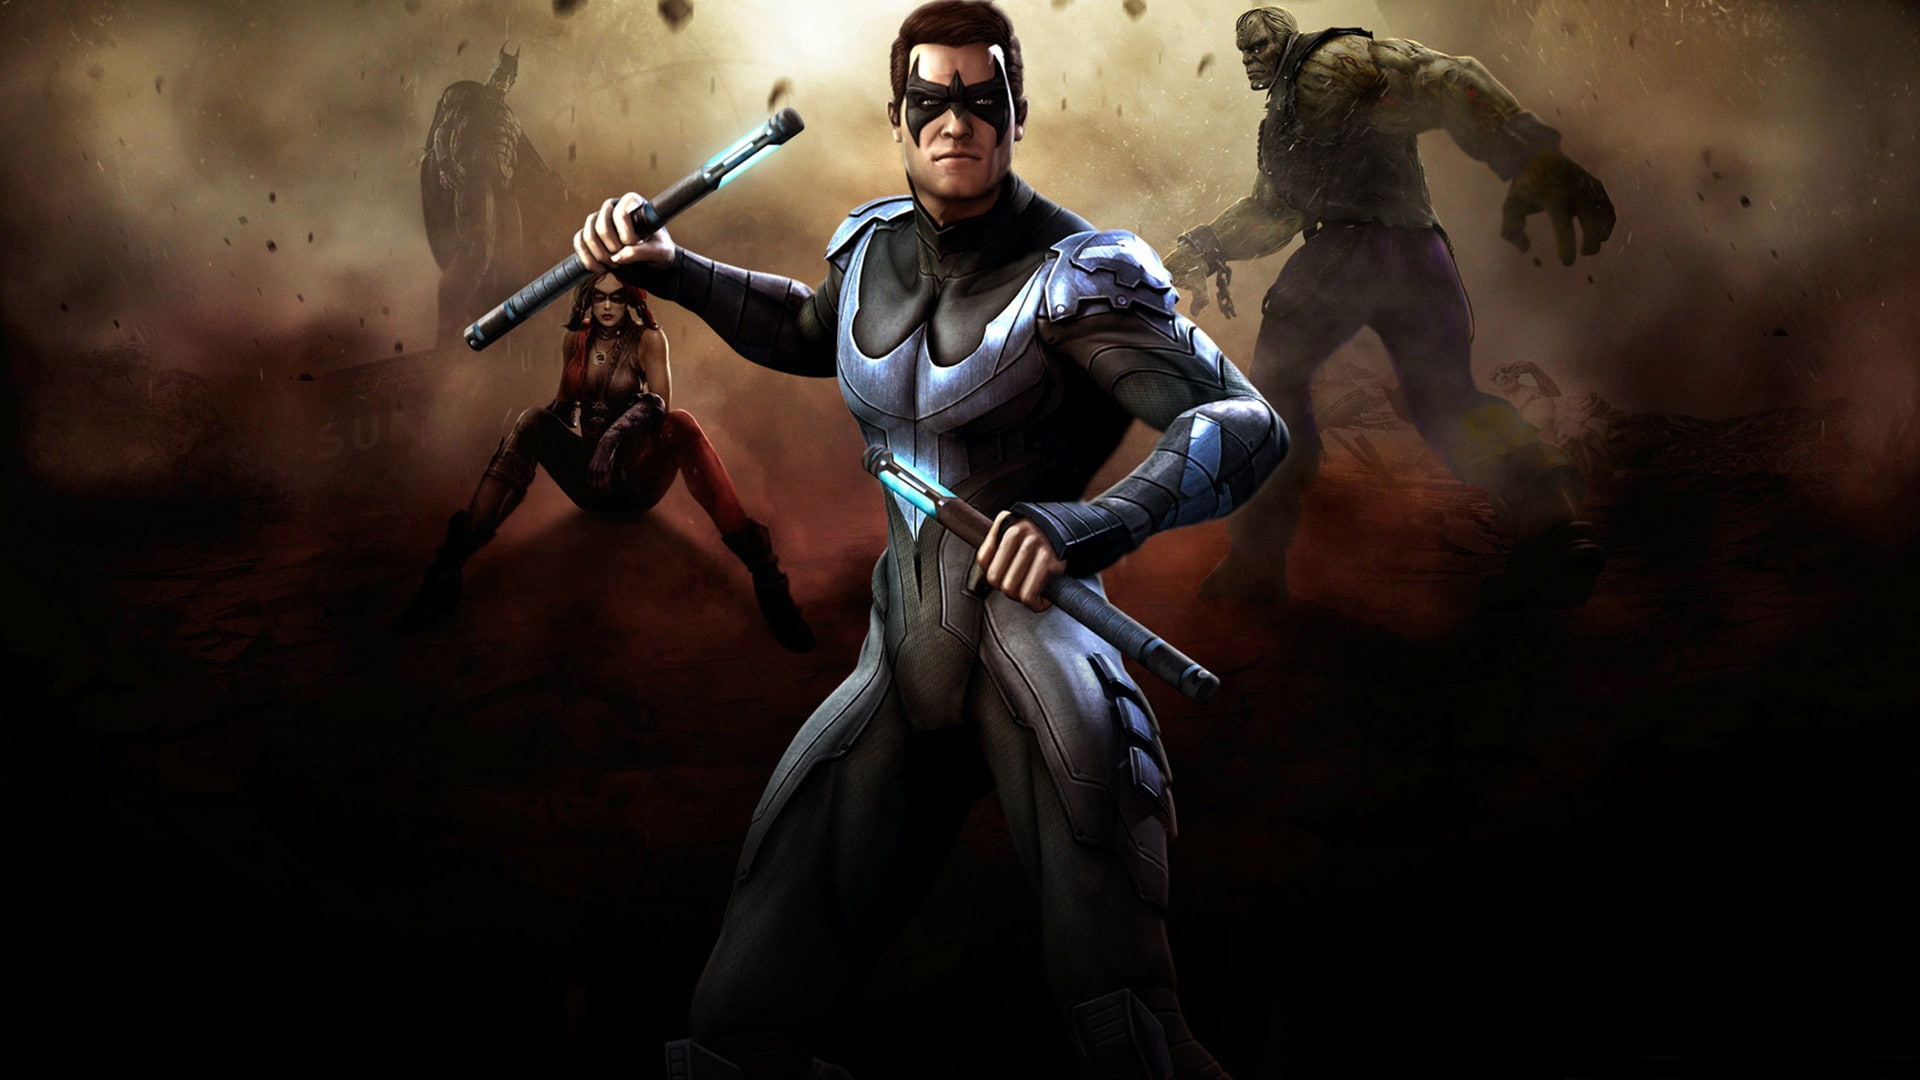 injustice gods among-quality wallpapers, DC Nightwing wallpaper